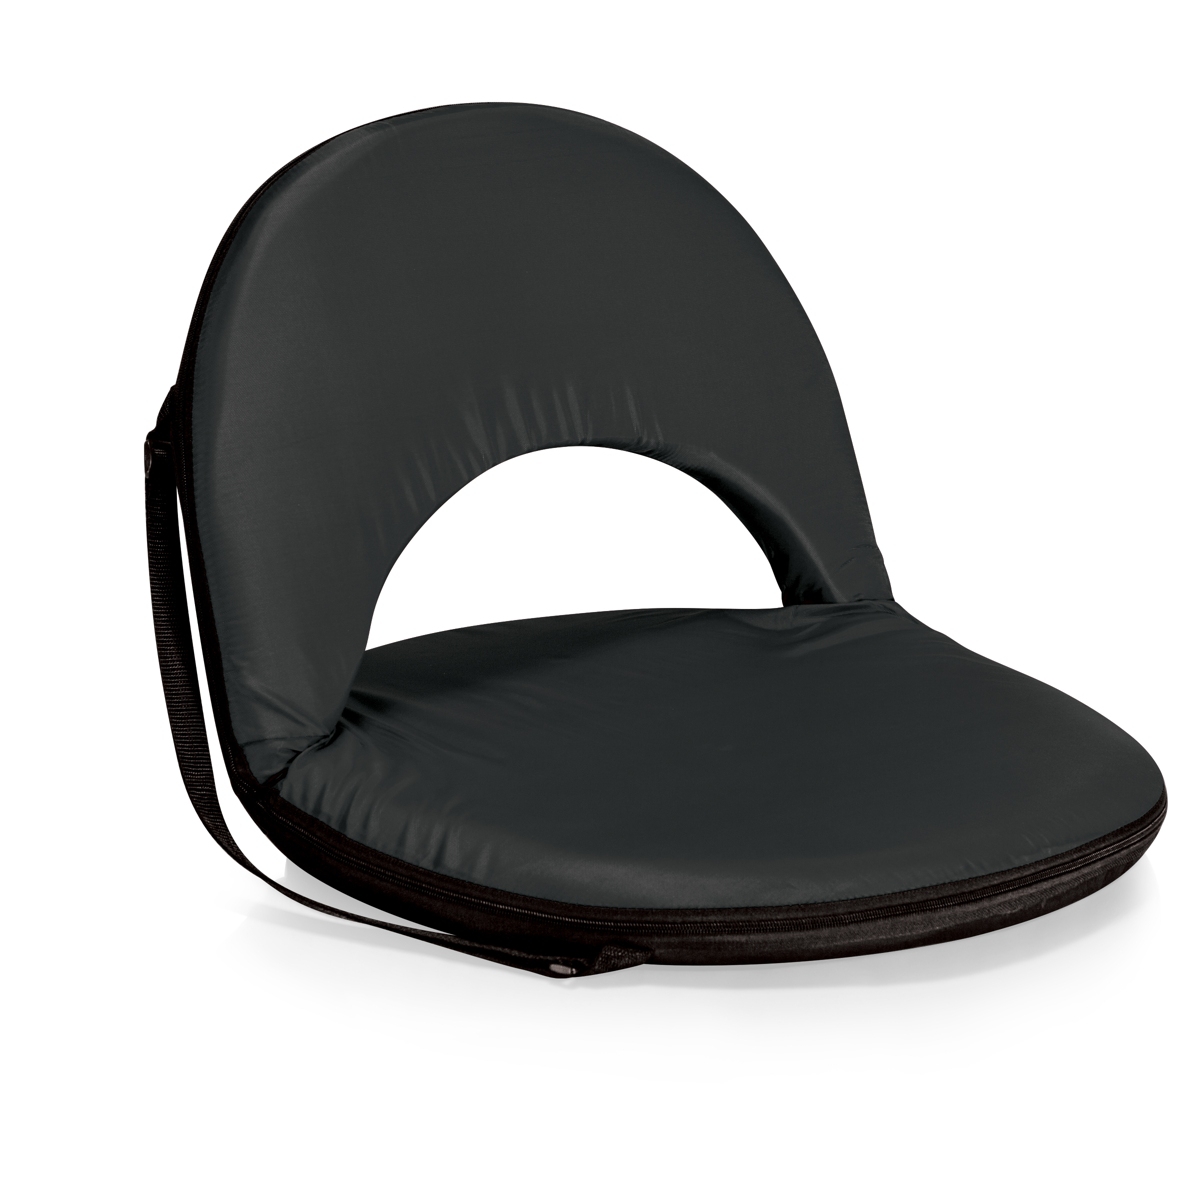 by Picnic Time Oniva Portable Reclining Seat - Black